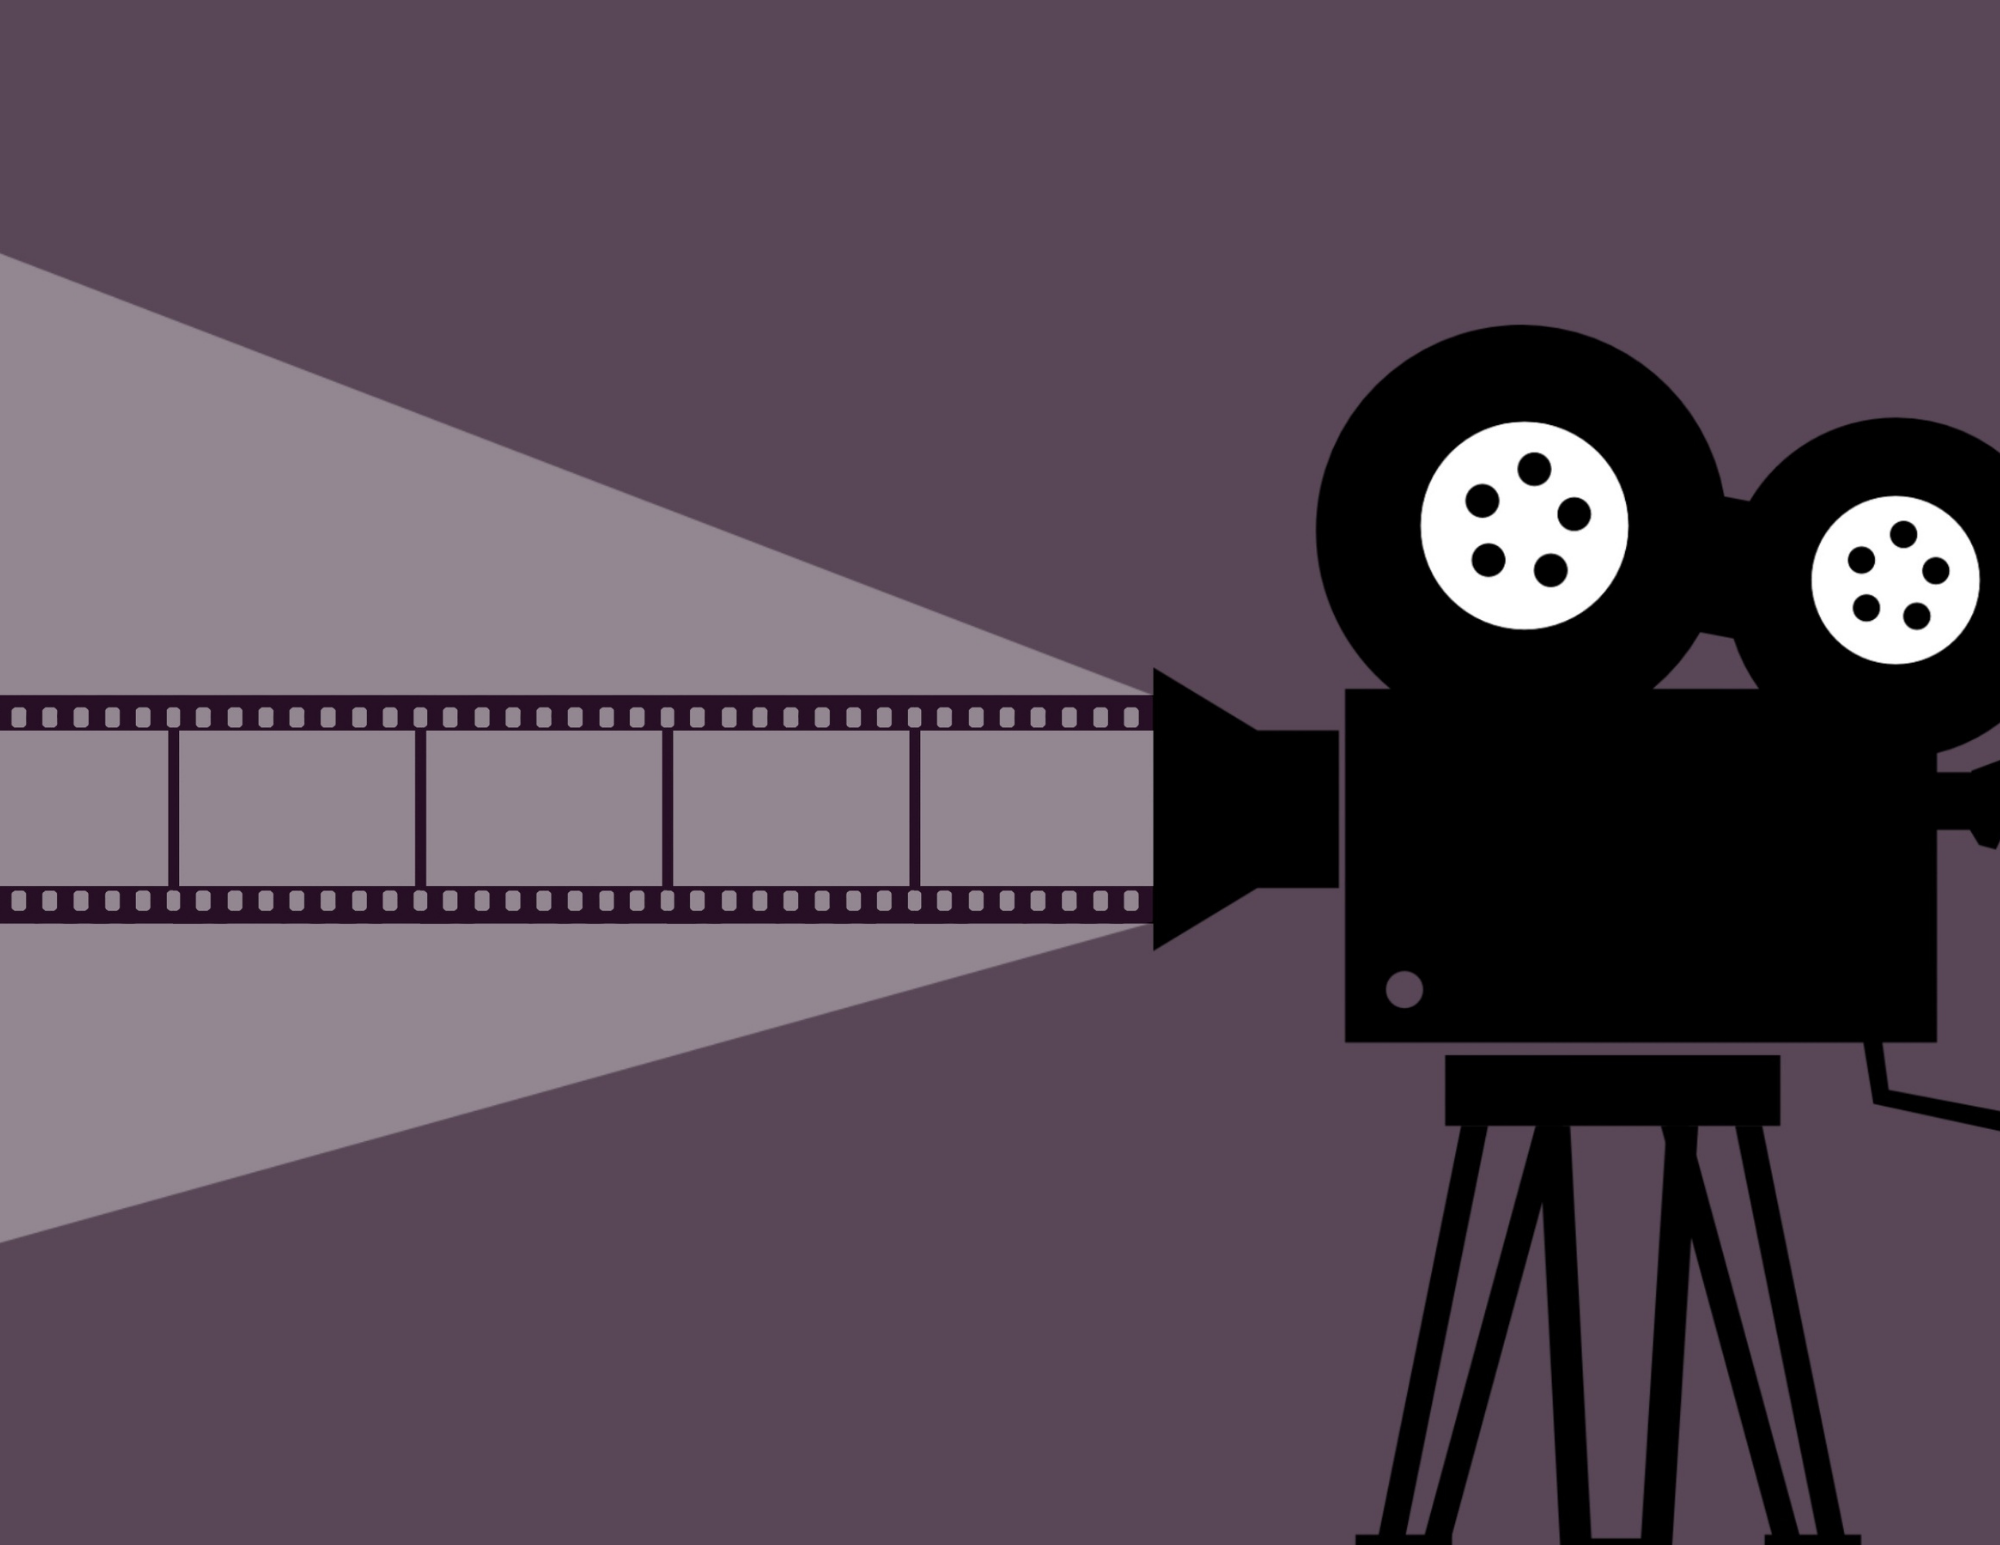 Black movie Camera with reel coming out of it. Against a grey background. 